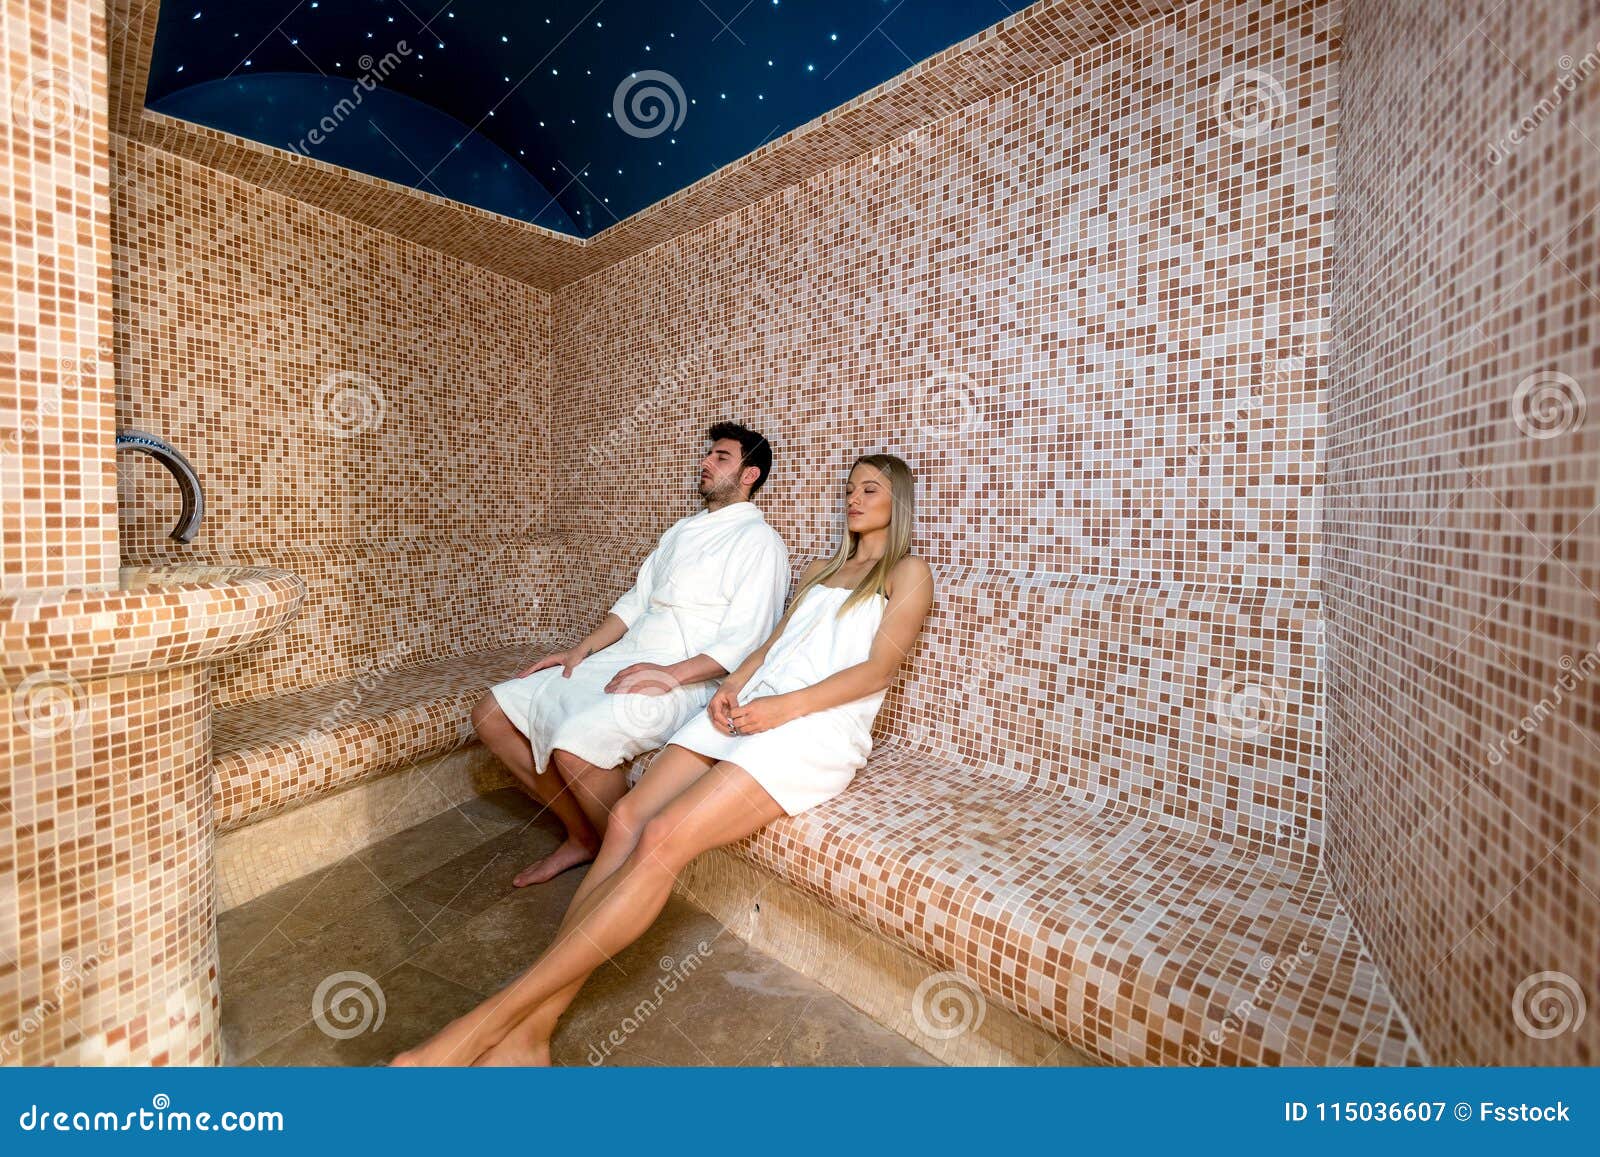 Young Couple Relaxing Inside Spa Sauna Turkish Bath - Two Lovers Enjoying Vacation in Luxury Resort Hotel Stock Image